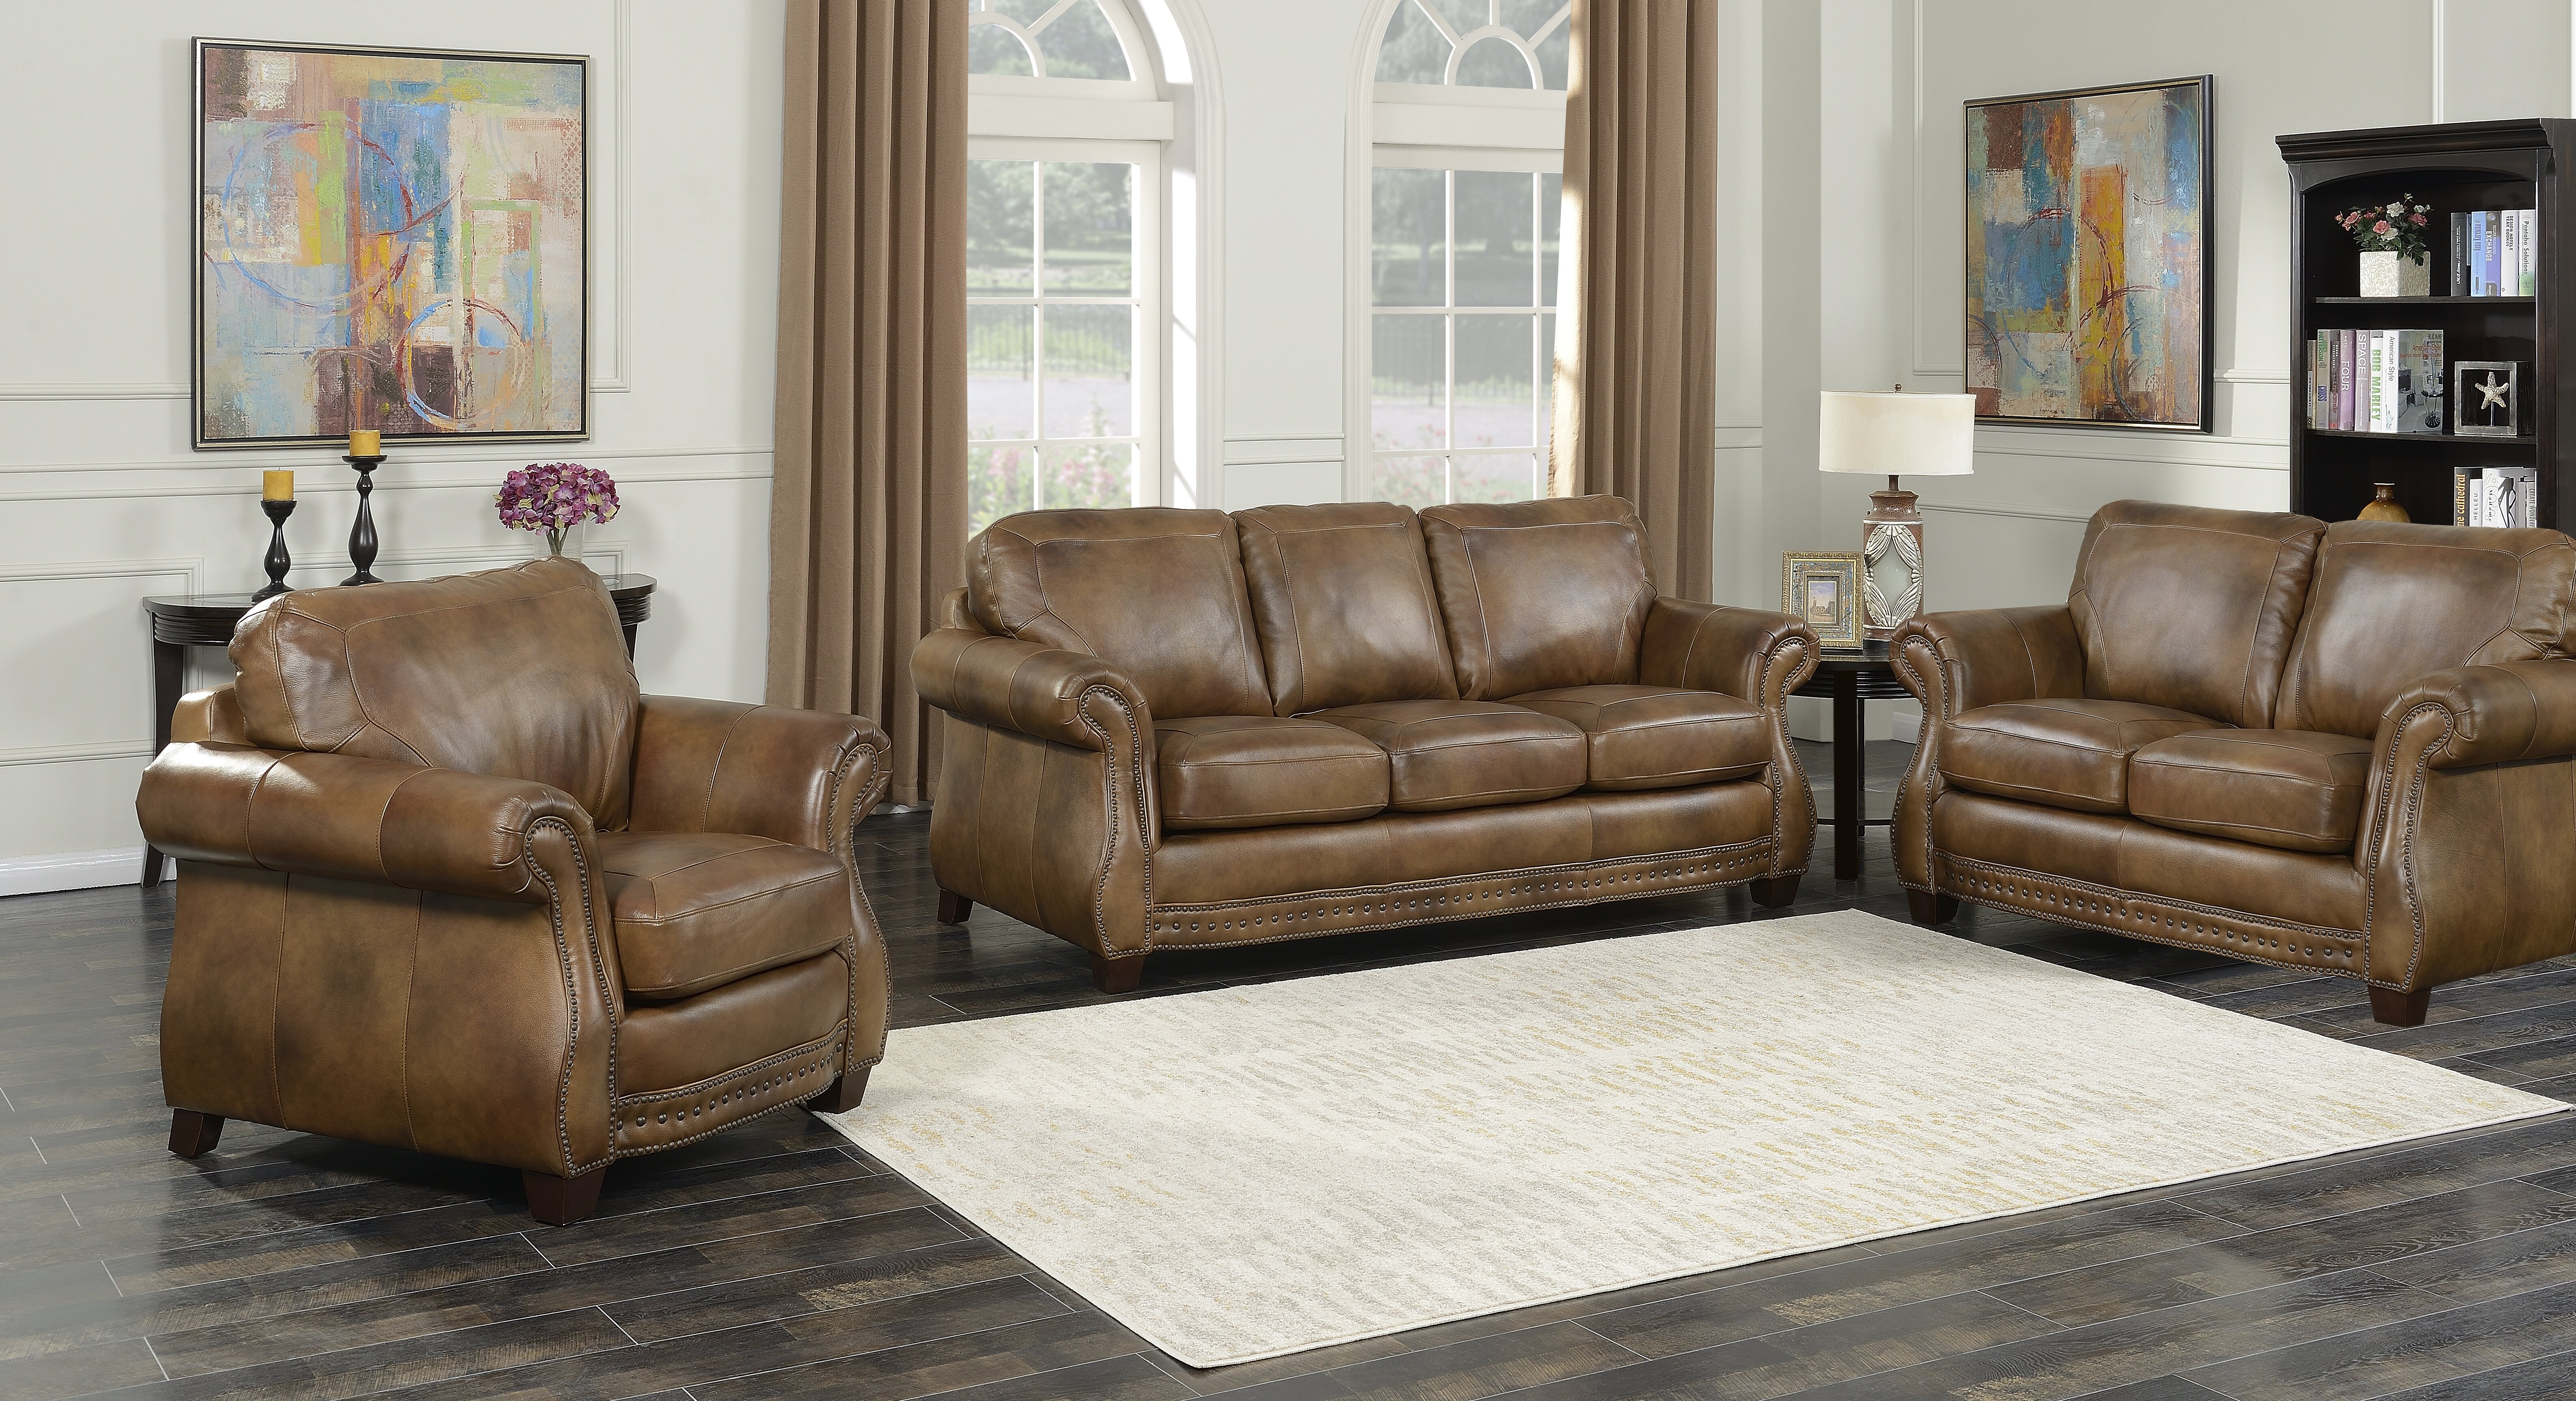 Genuine Leather Living Room Sets Havertys - Ma Xiaoying Genuine Leather